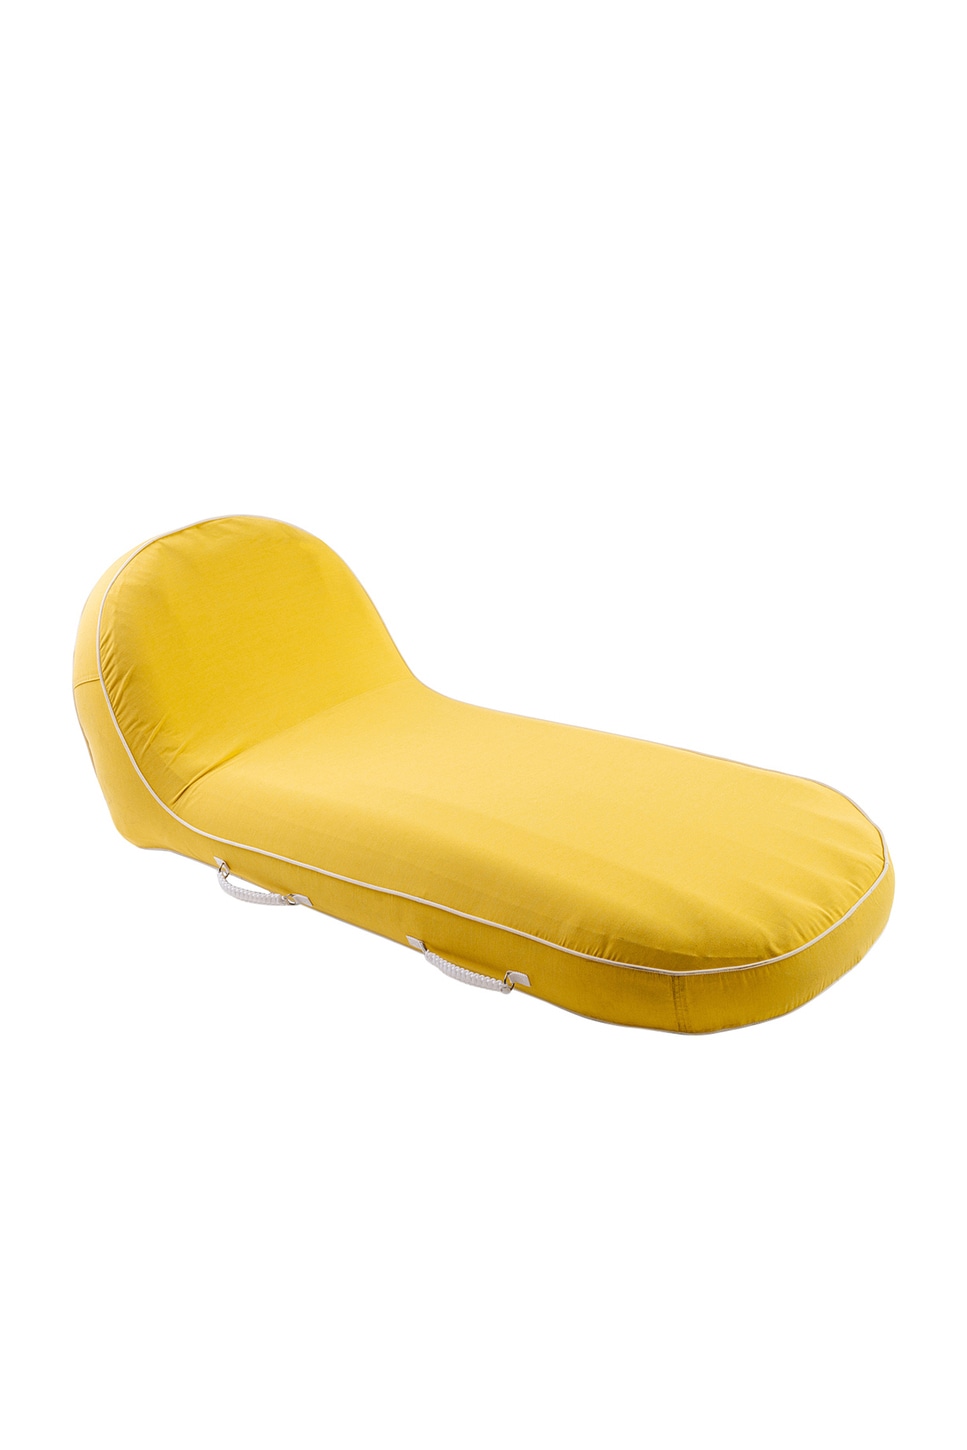 Image 1 of business & pleasure co. Pool Lounger in Riviera Mimosa